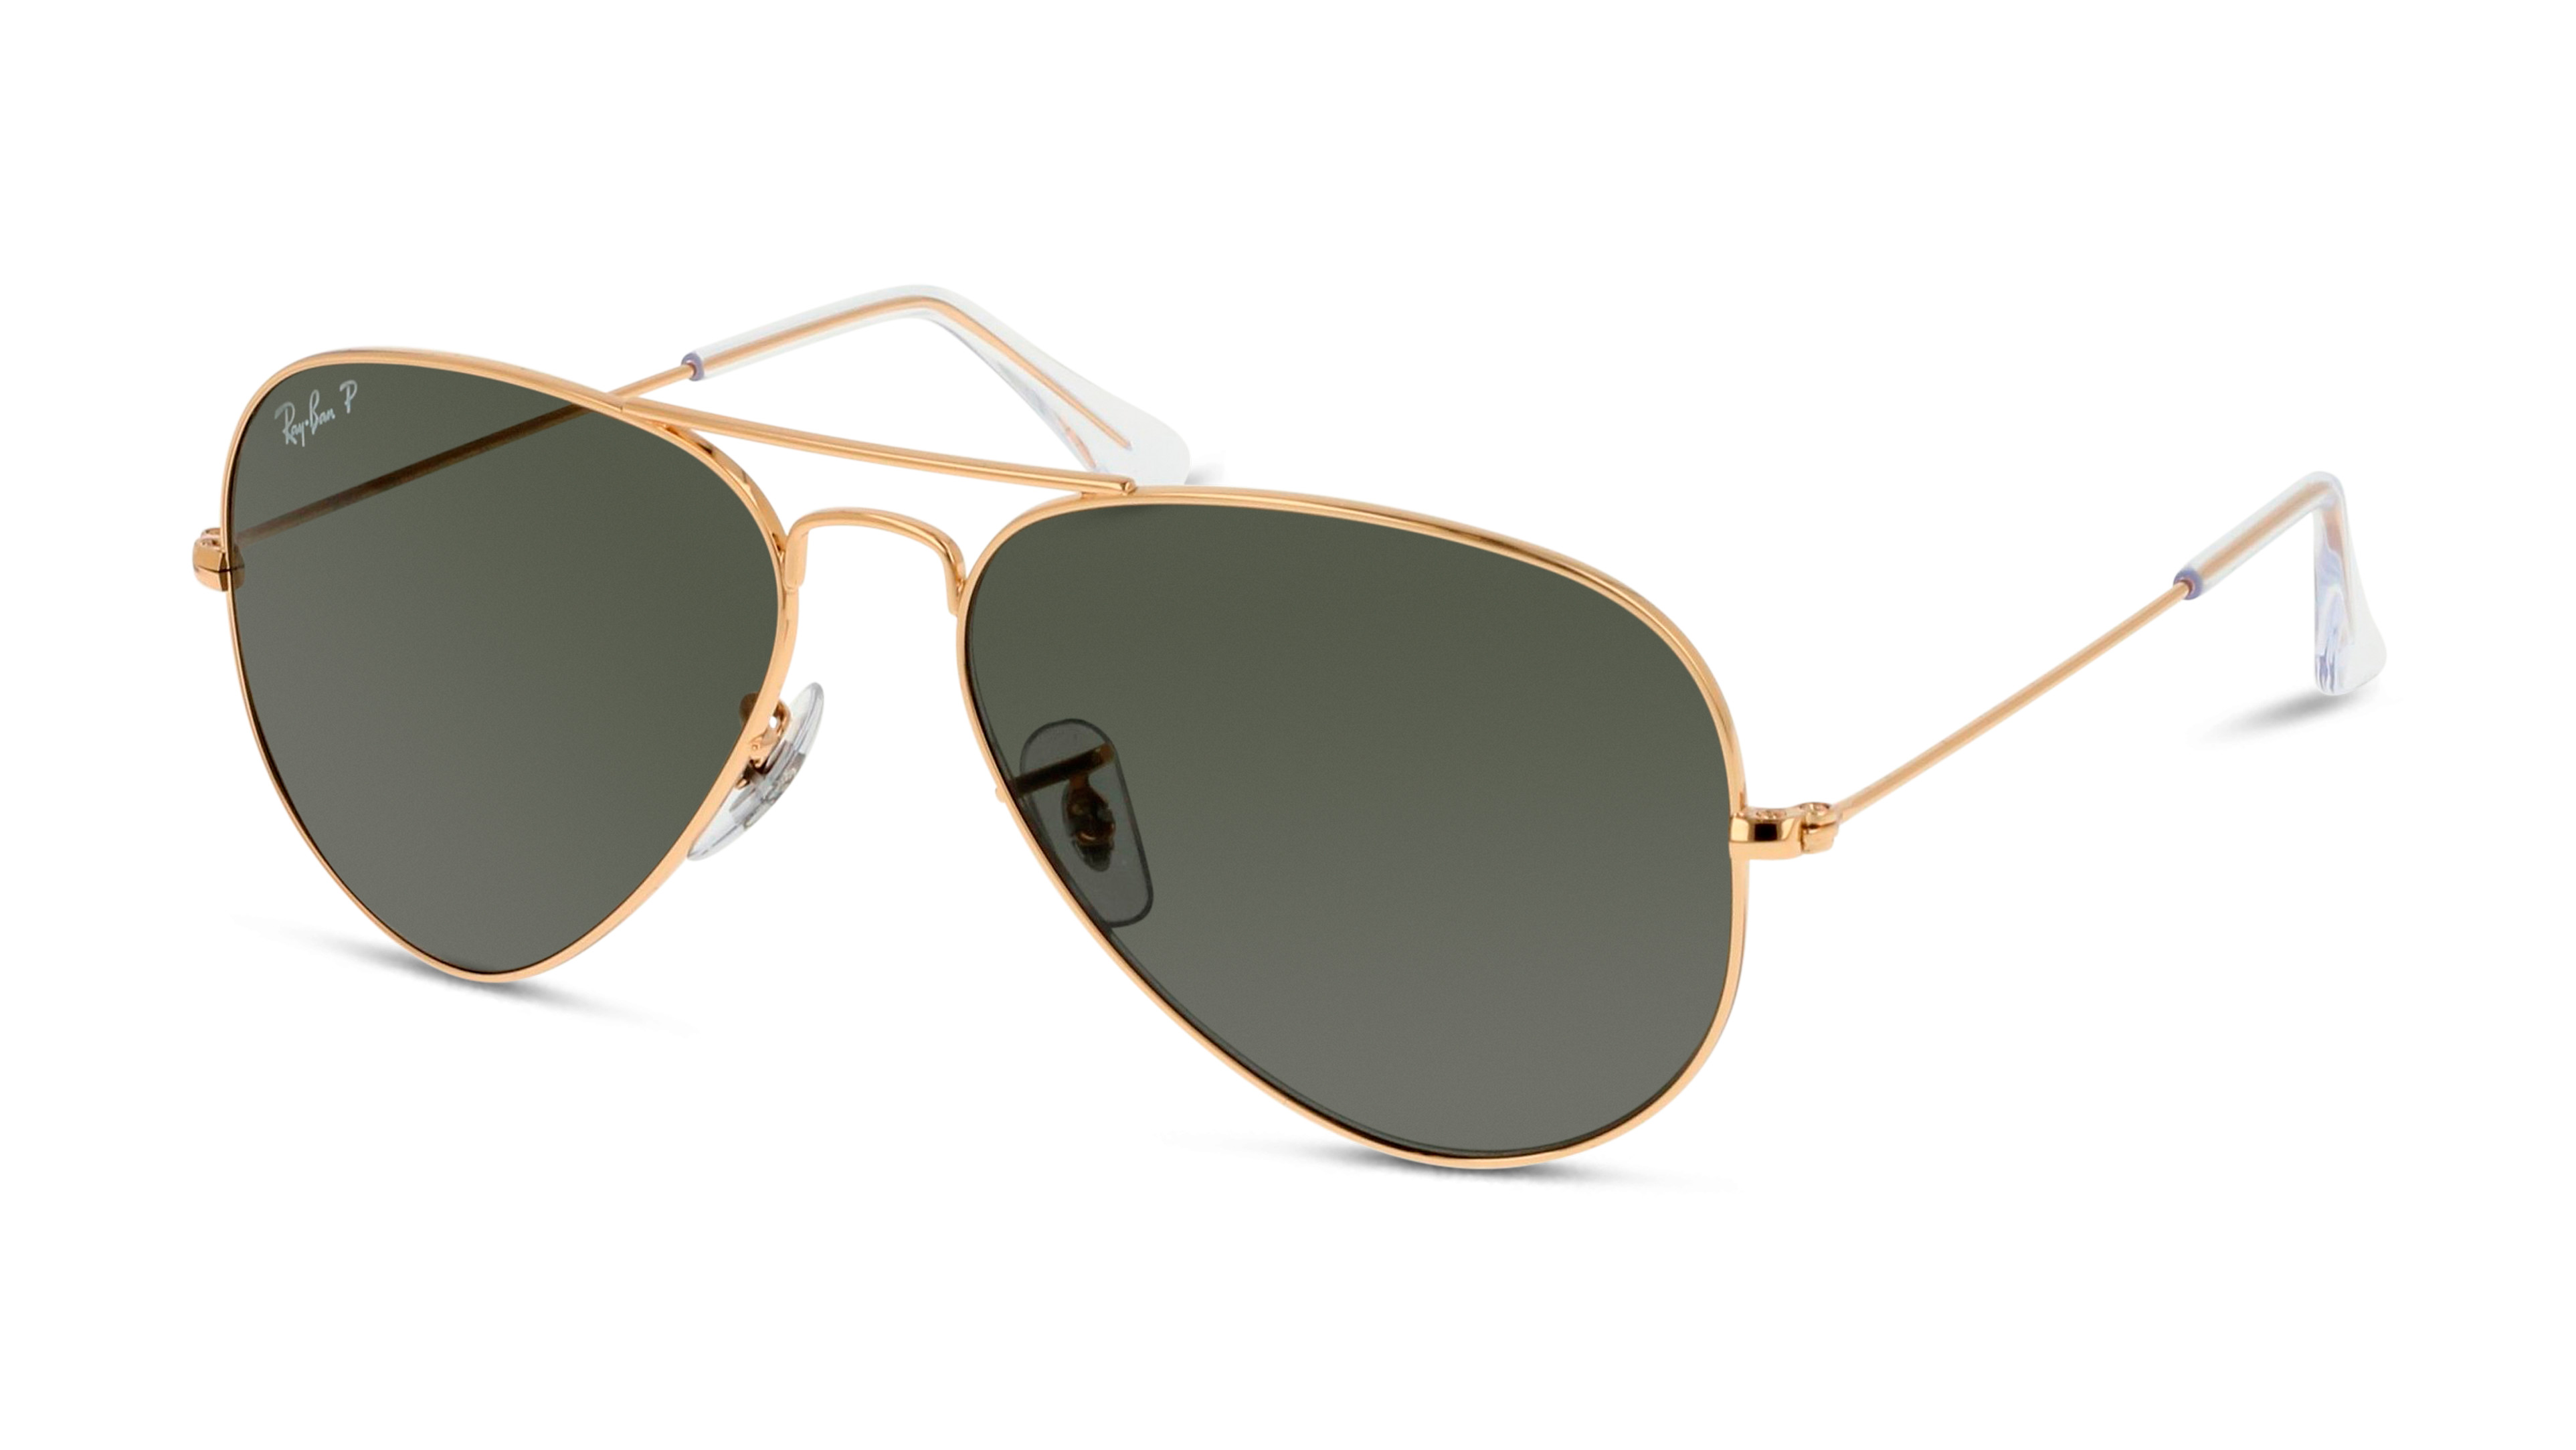 [products.image.angle_left01] Ray-Ban AVIATOR LARGE METAL 0RB3025 001/58 Sonnenbrille